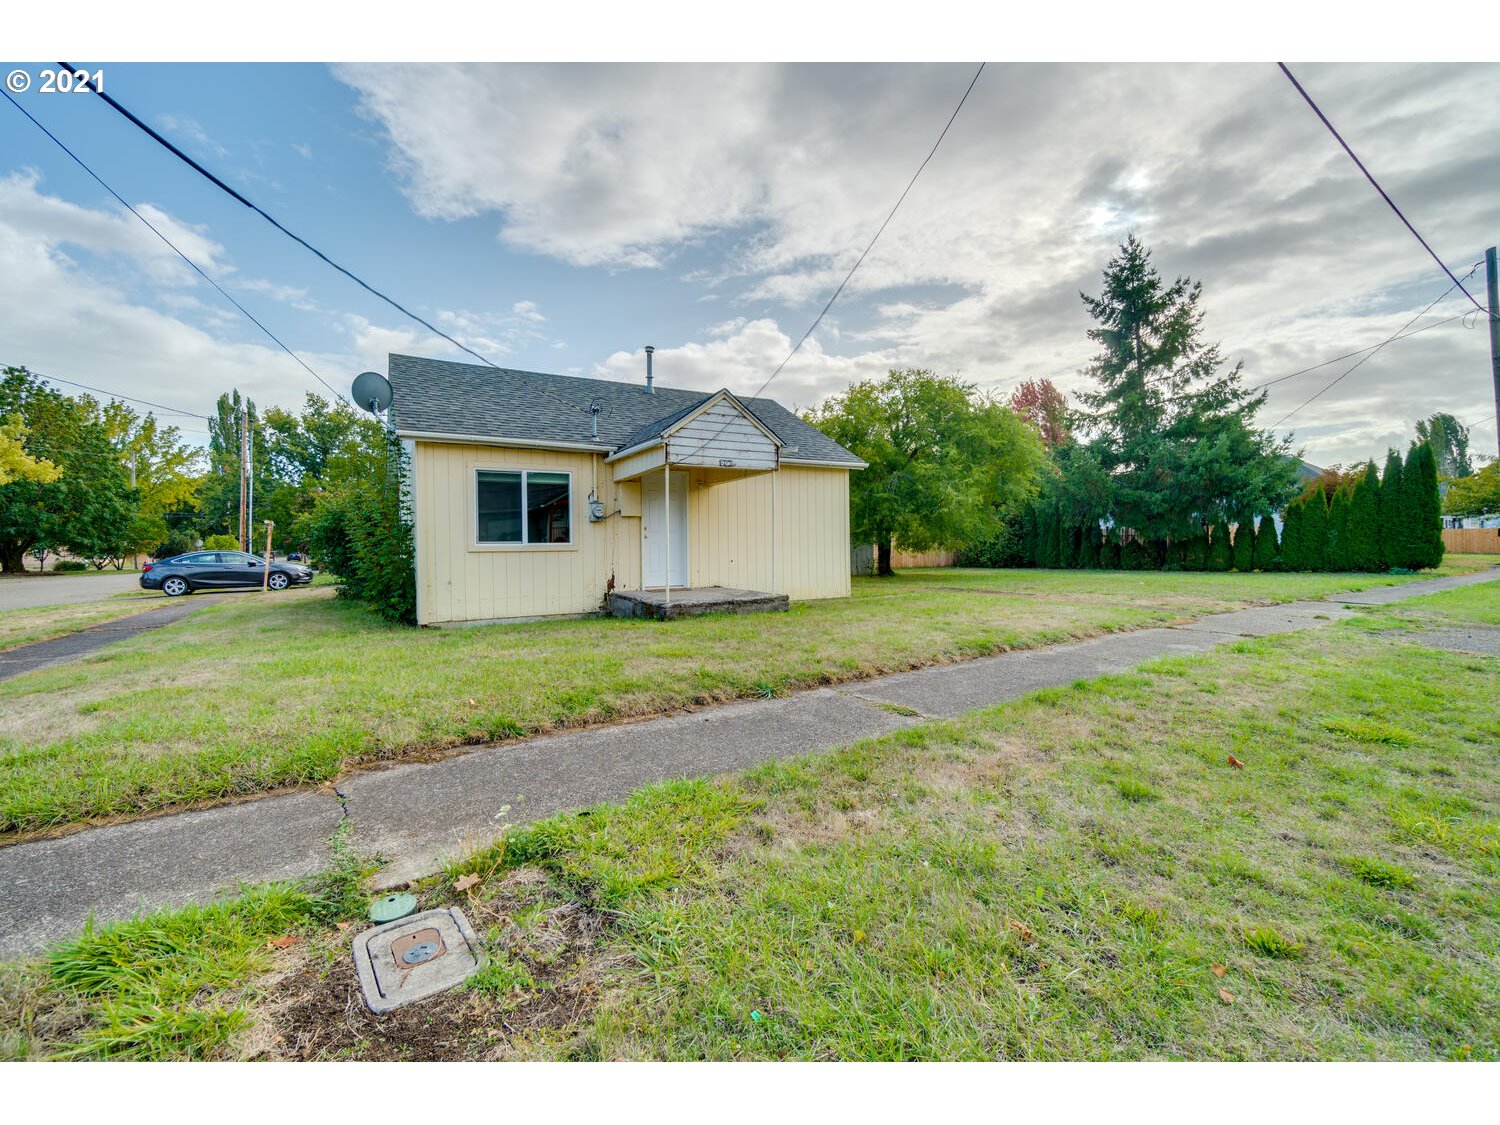 508 NW SHERMAN ST (1 of 26)